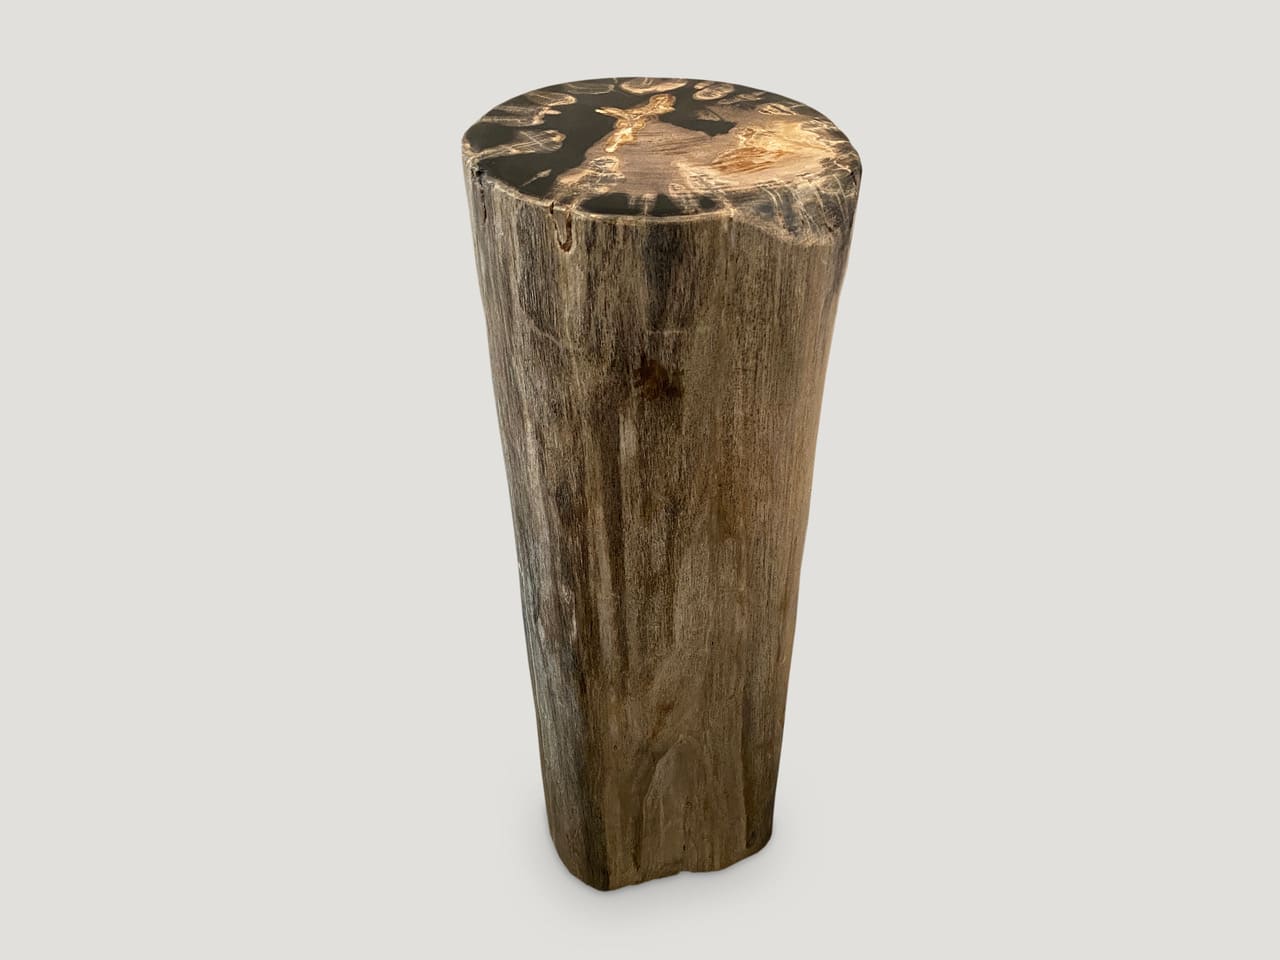 high quality petrified wood pedestal or side table